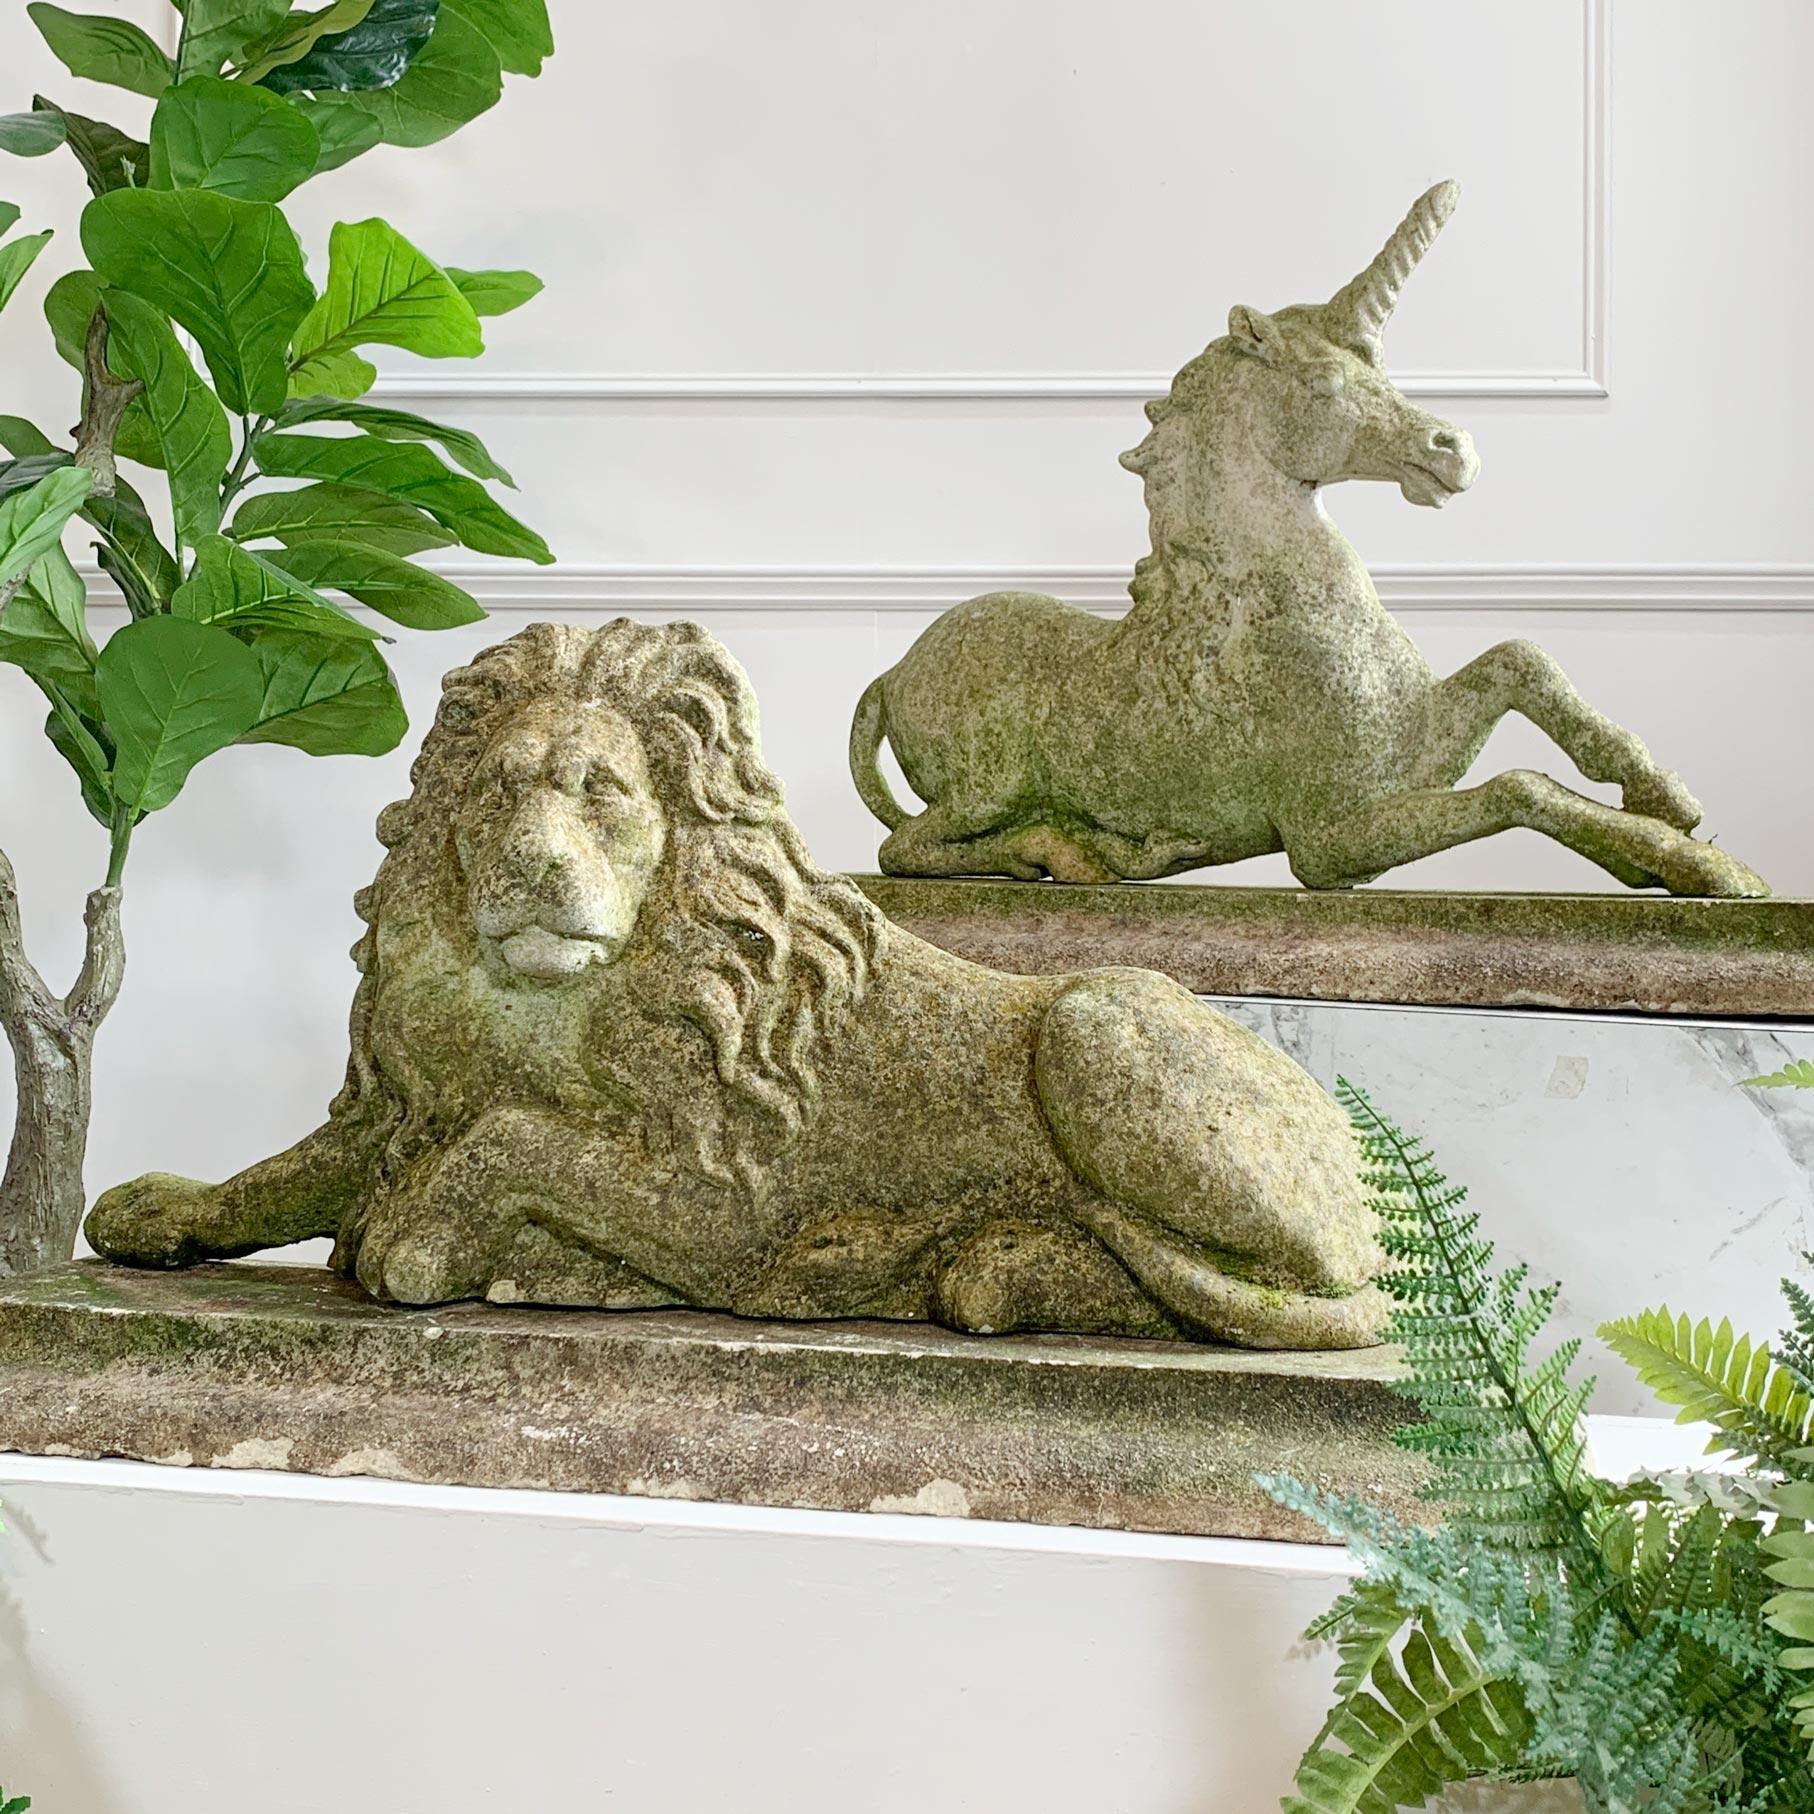 An outstanding pair of cast statues on associated plinths, possibly cast in Portland Cement, of the Unicorn of Scotland and the Lion of England. Since 1603 these have featured on the Royal Coat of arms, aside the Royal Standard. The incredibly